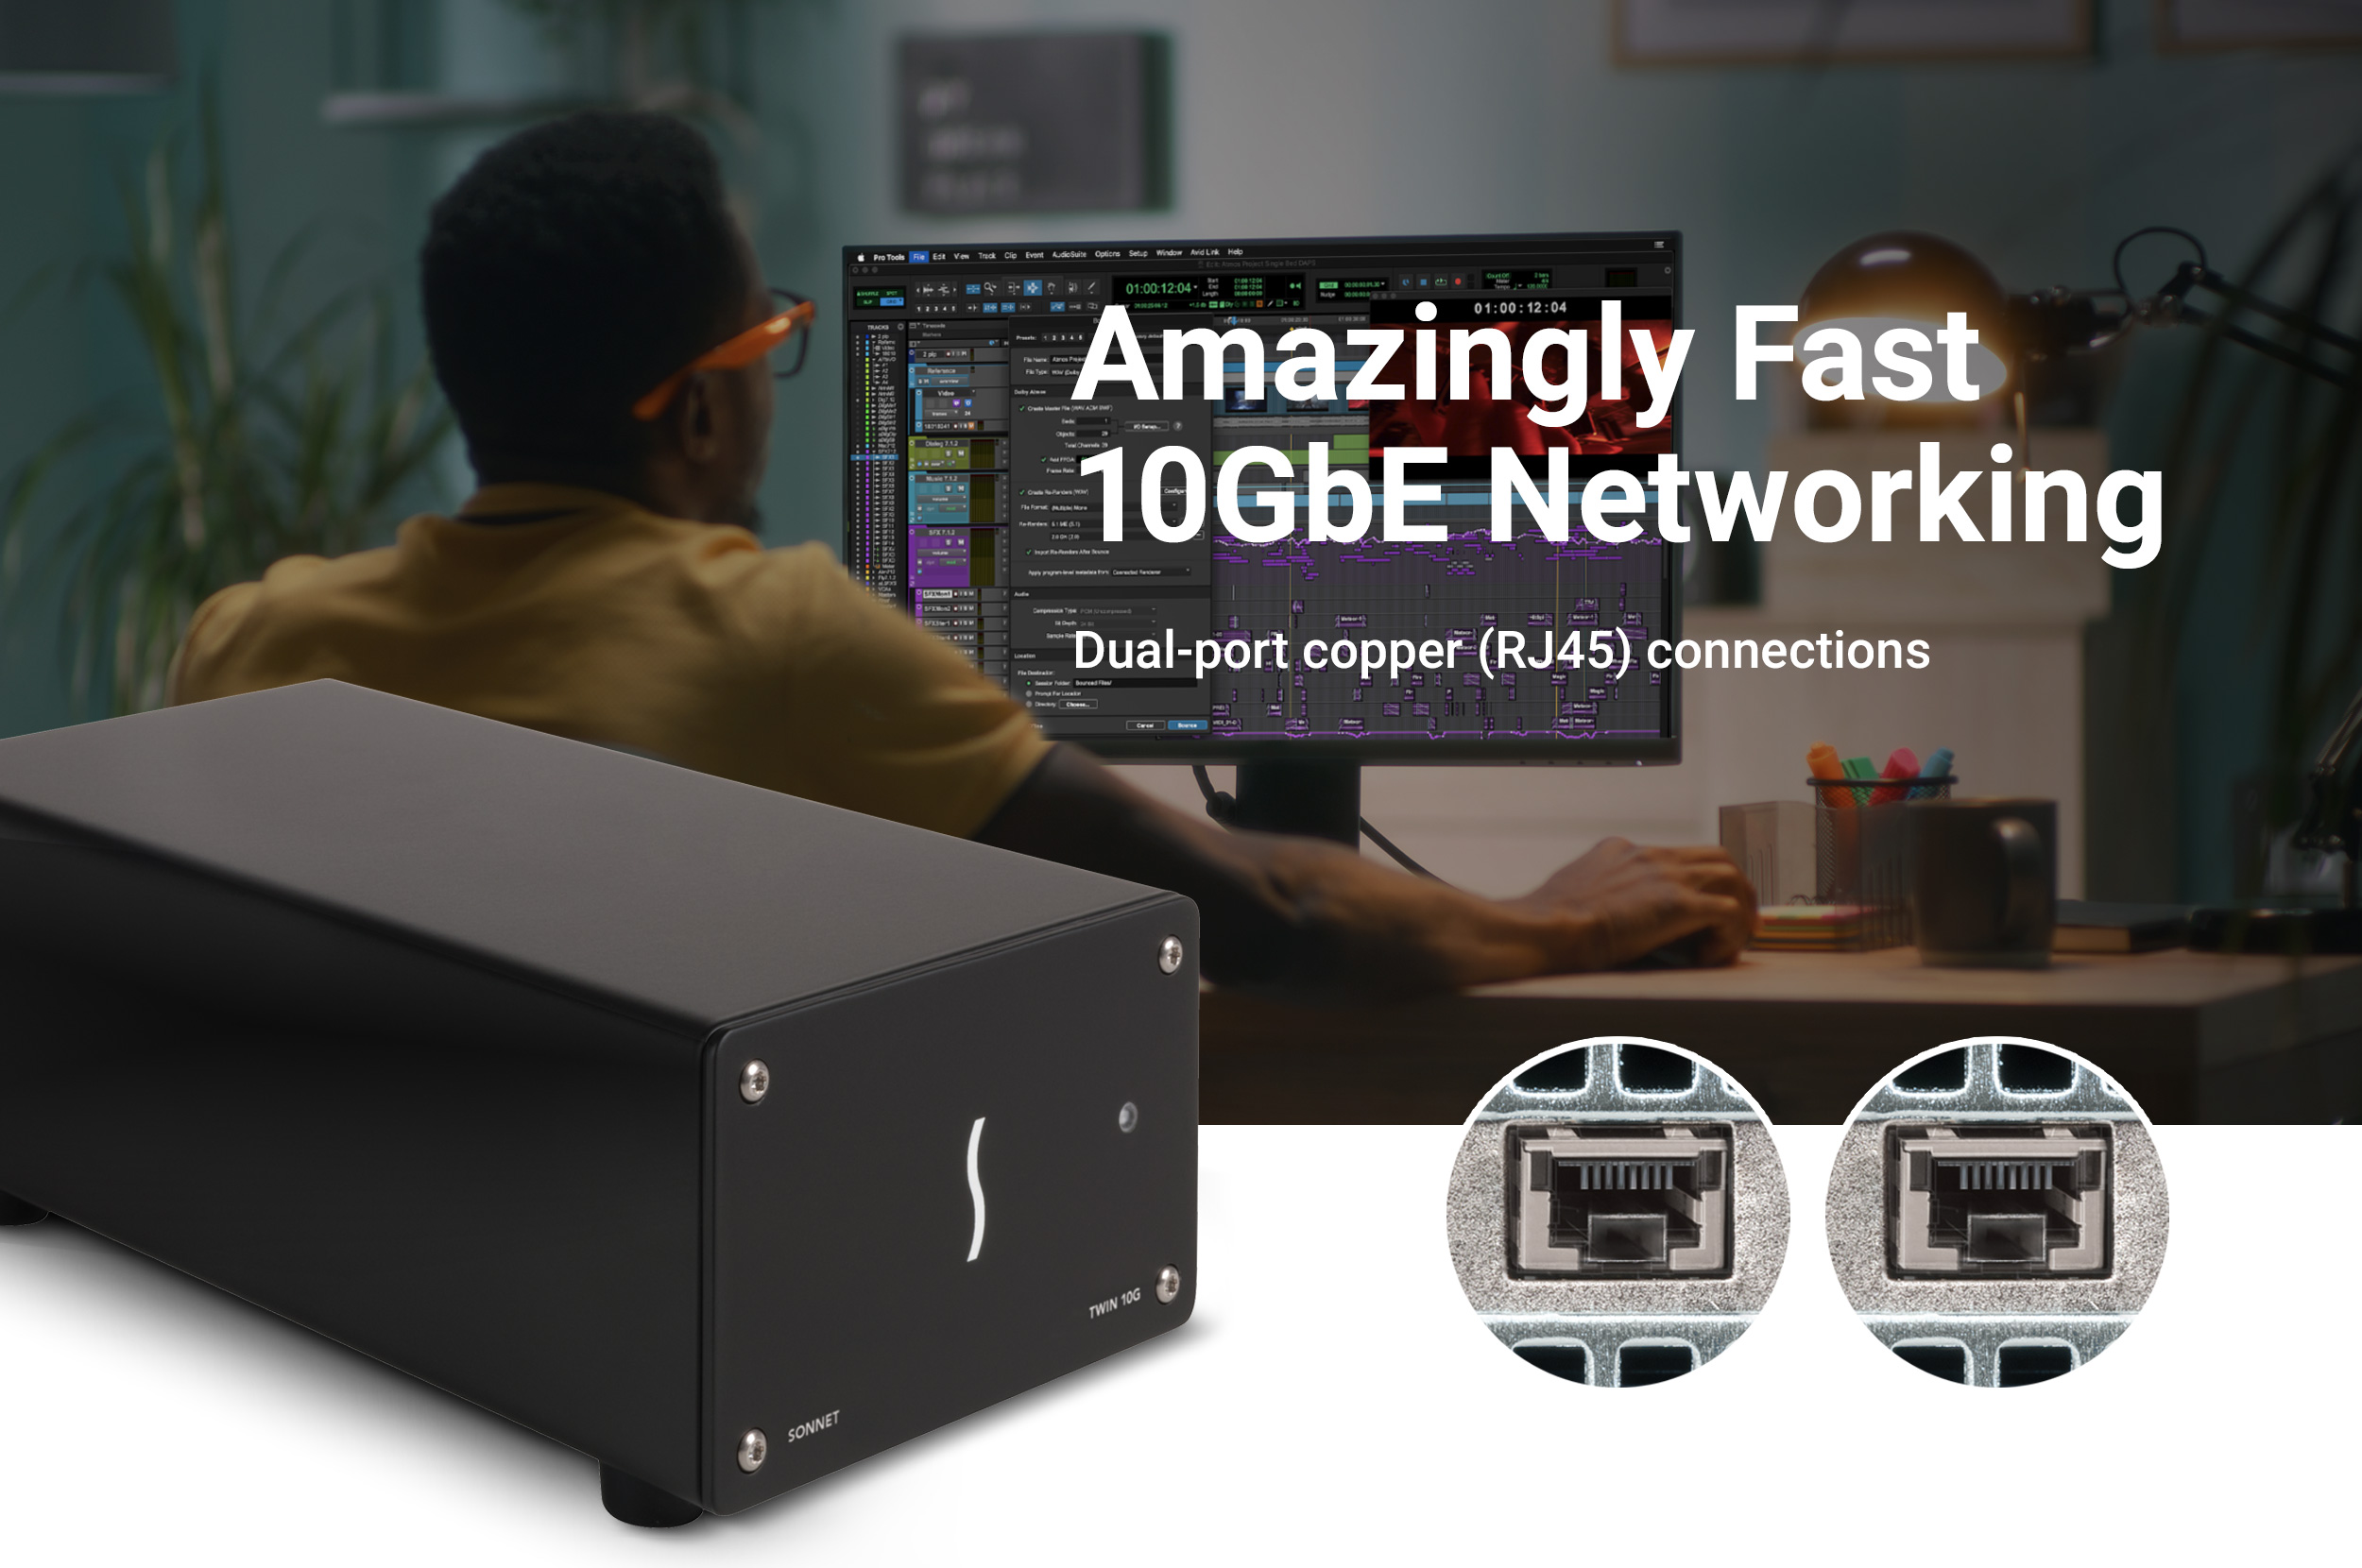 Twin10G Amazingly Fast 10GbE Networking with Dual-port Copper (RJ45) Connections